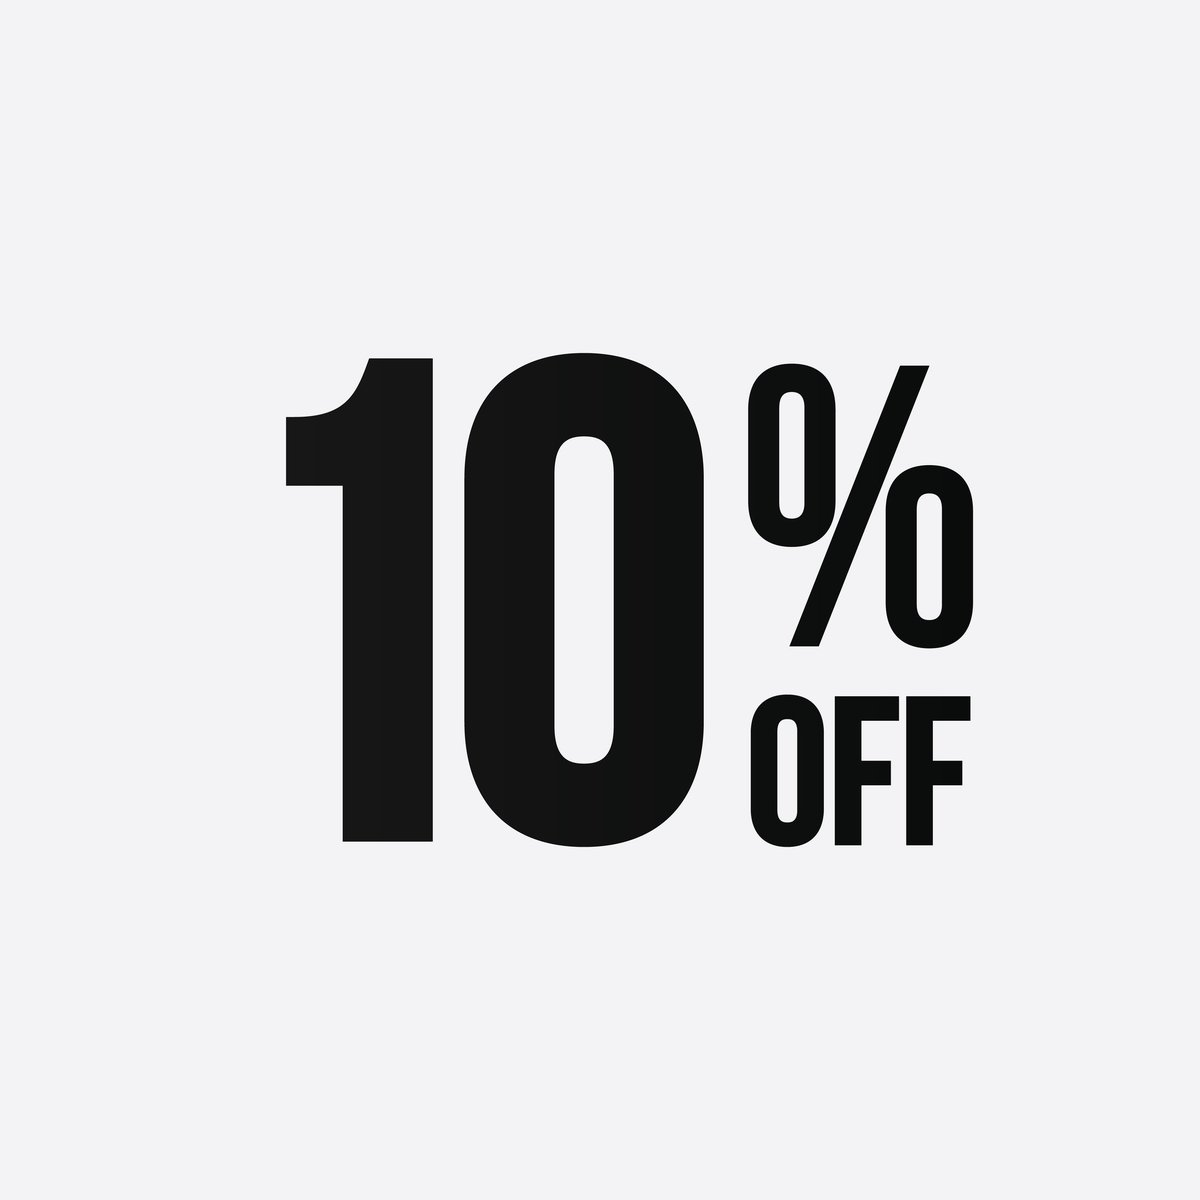 Starting on Monday 9/11/23 we are offering 10% off on all purchases over $250 for the remaining month of September. I will post the promo code on Monday. 
#zoneoffroad #foxshocks #readylift #superlift #jks #iconvehicledynamics #kingshocks #veteranowned #veterans #offroad #liftkit